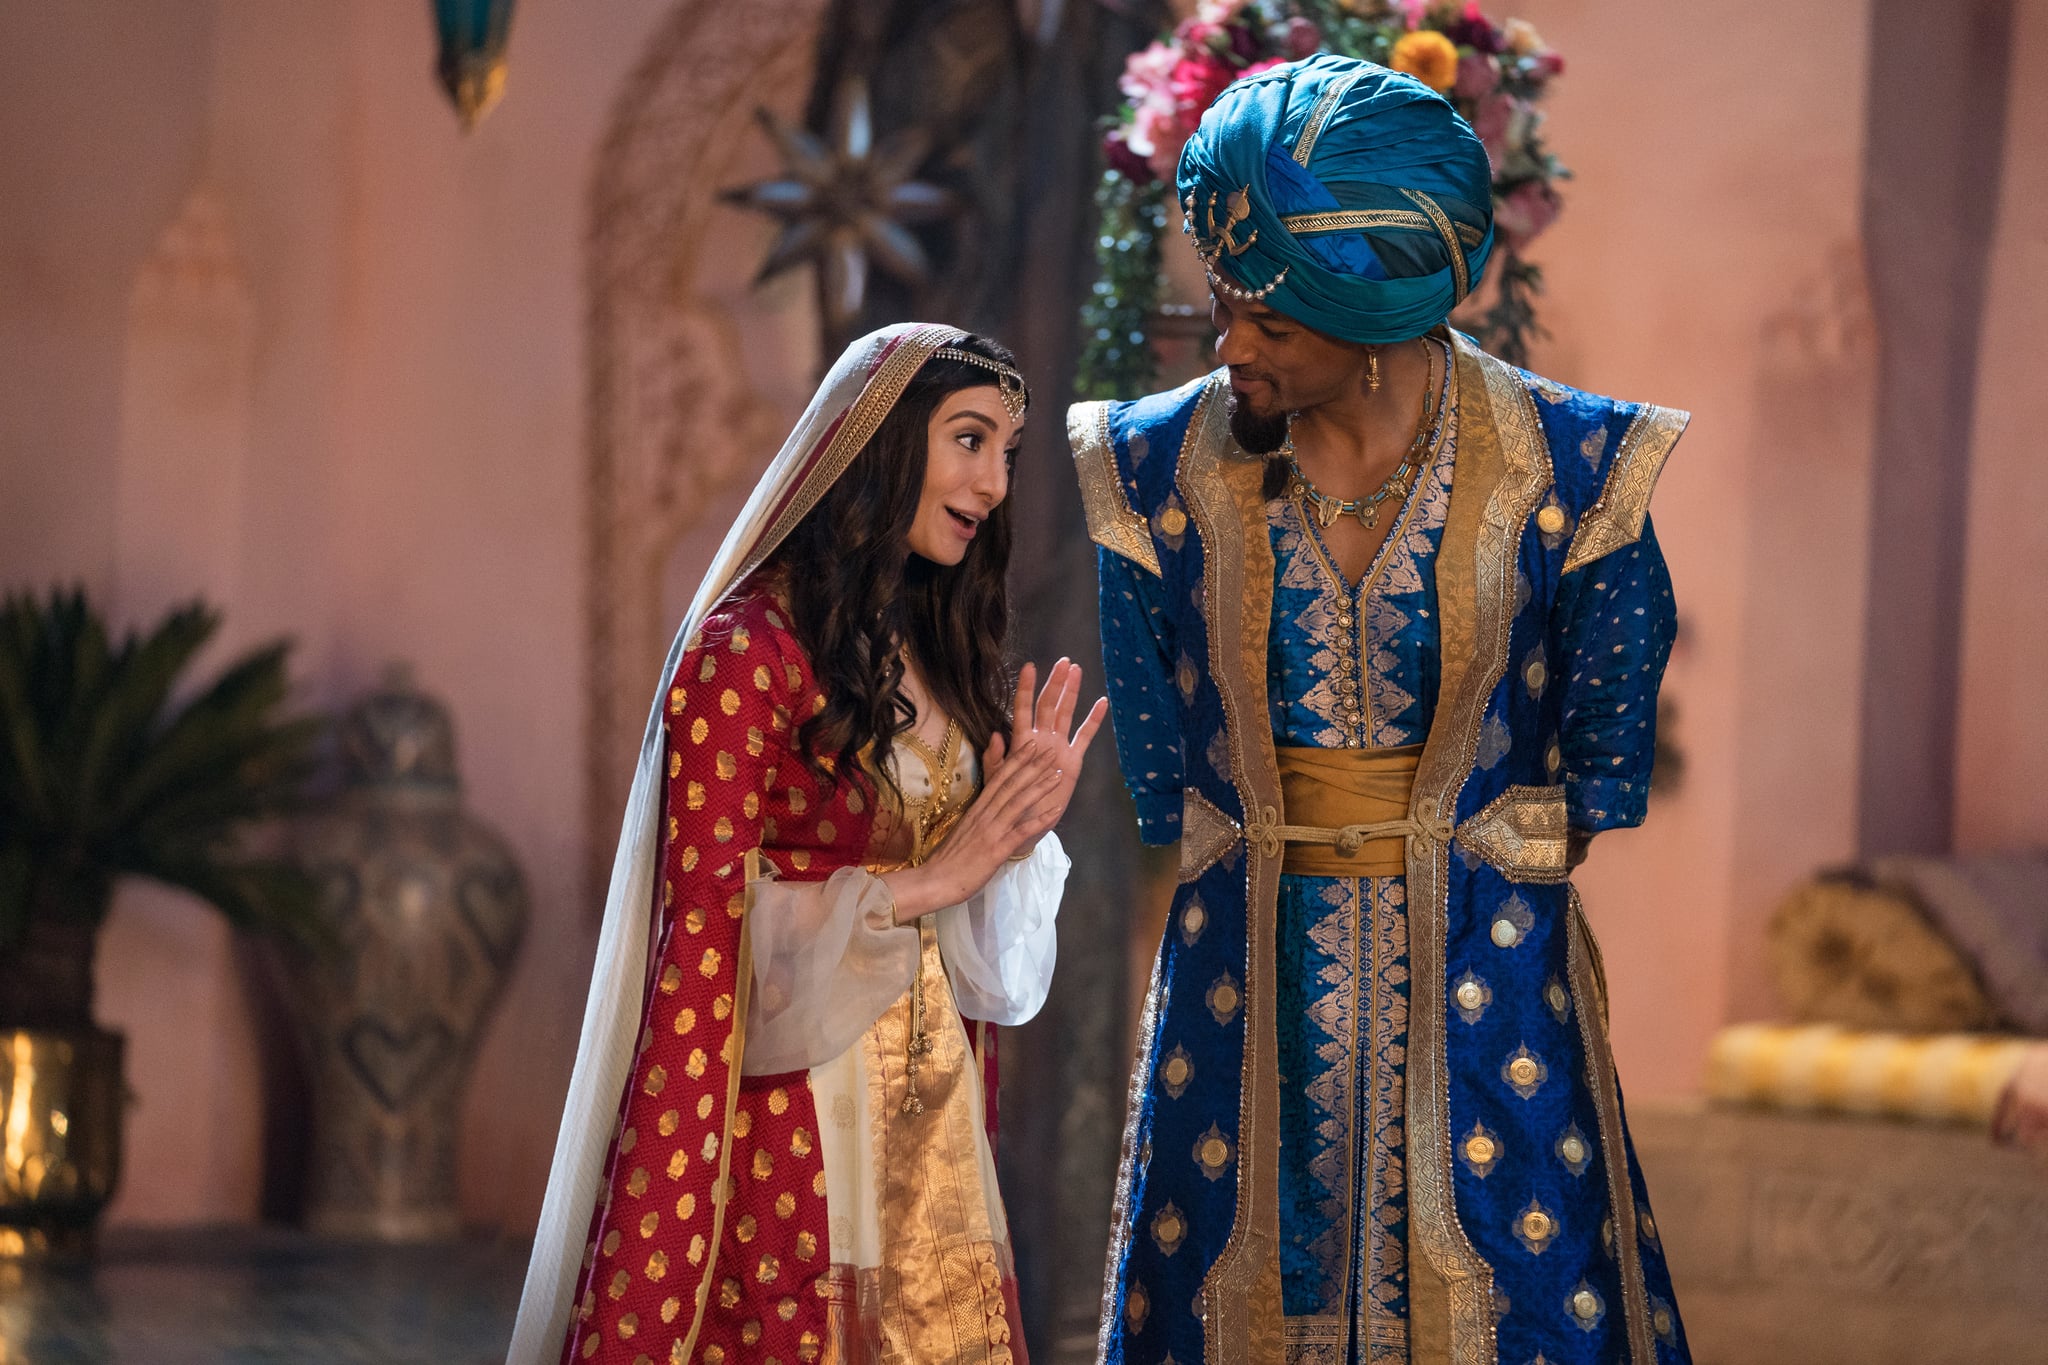 Nasim Pedrad is Dalia and Will Smith is Genie in Disney's live-action ALADDIN, directed by Guy Ritchie.